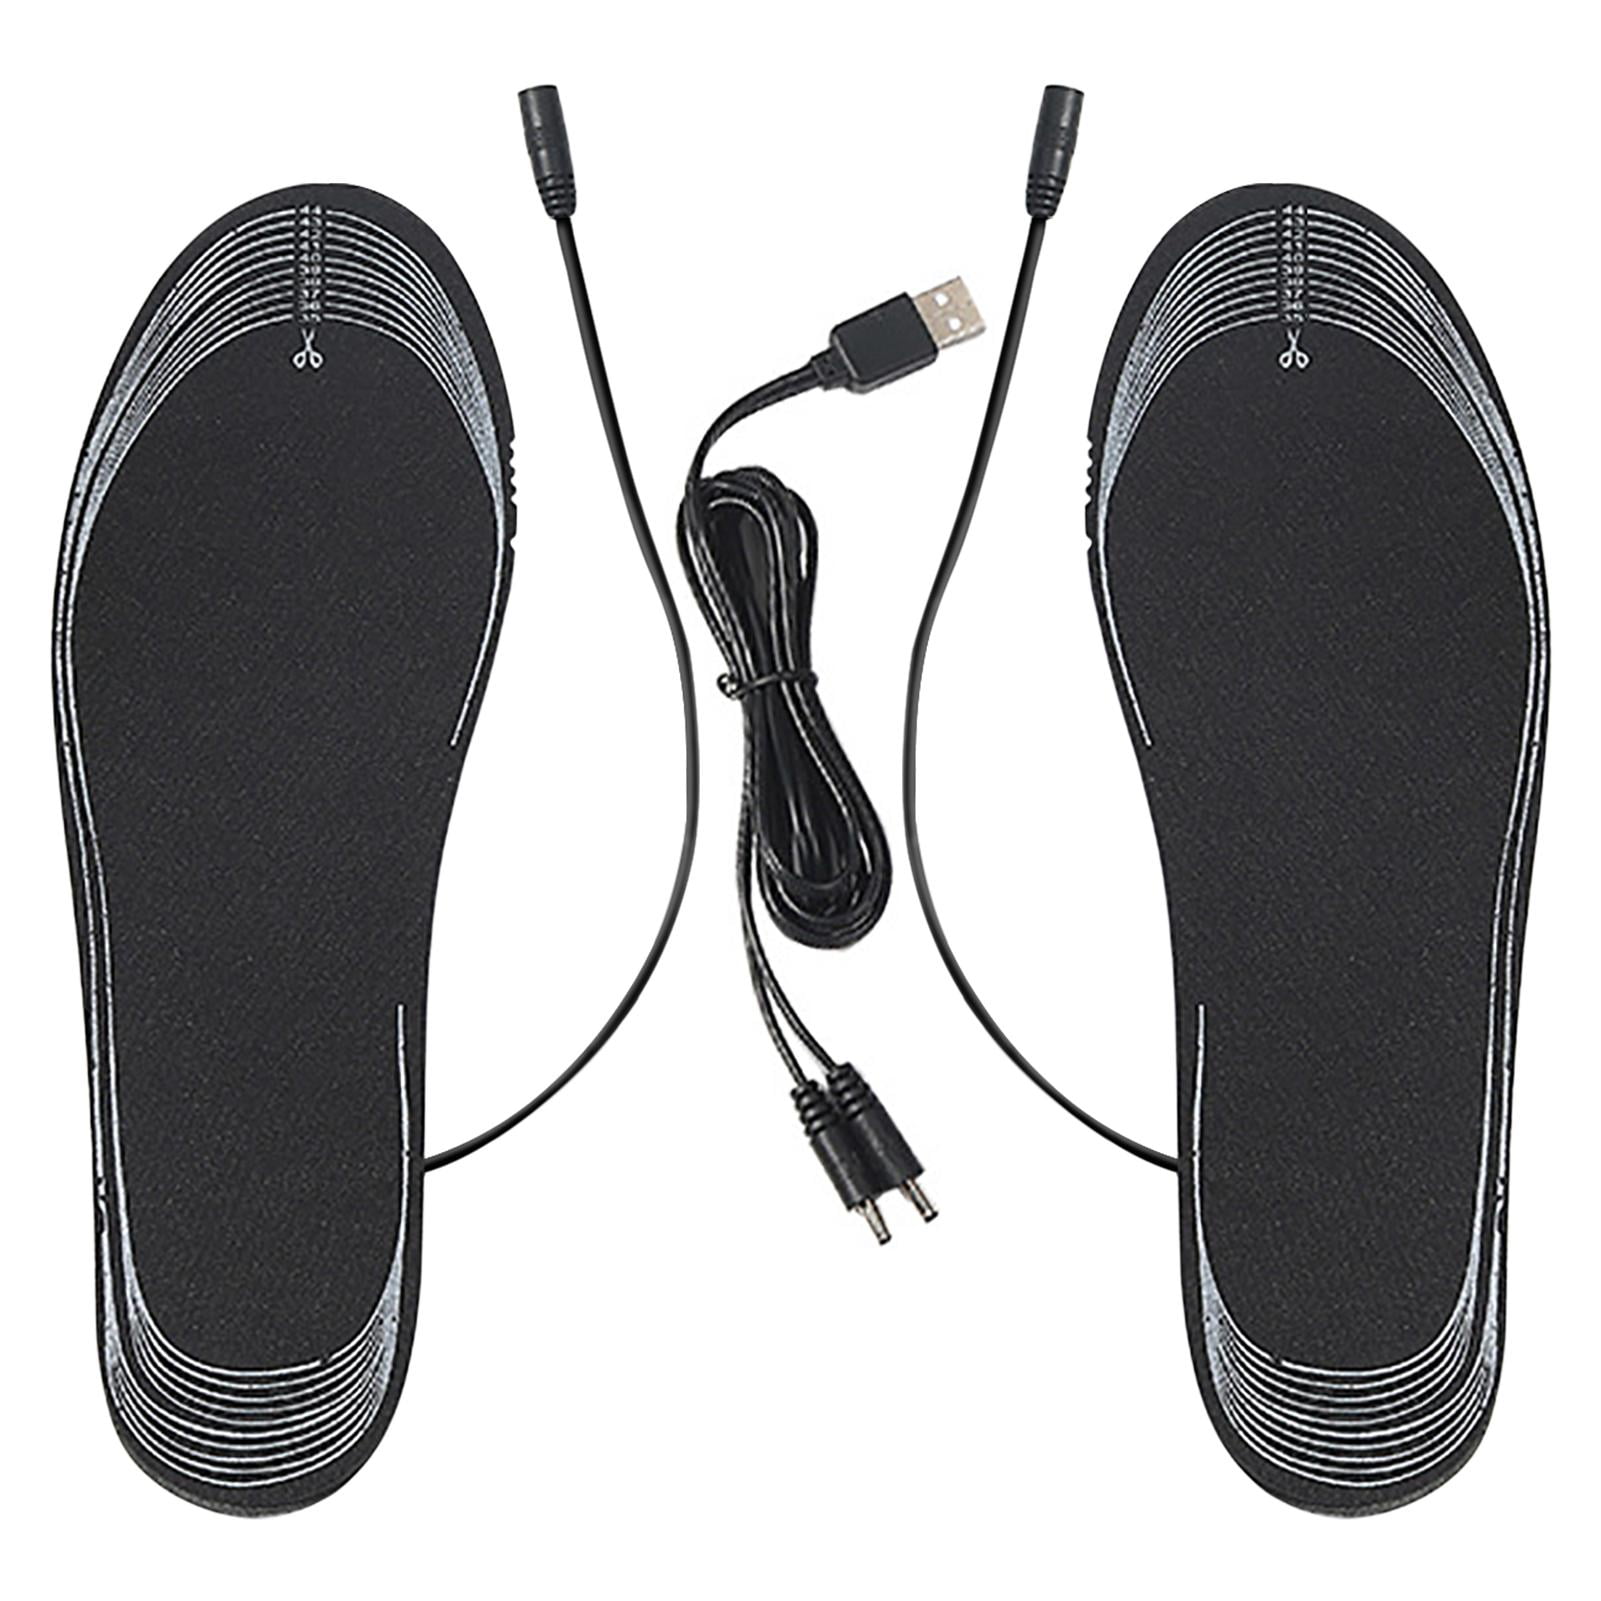 Details about   USB Warmer Foot Shoes Plush Warm Electric Slipper Feet Heat Washable Winter US